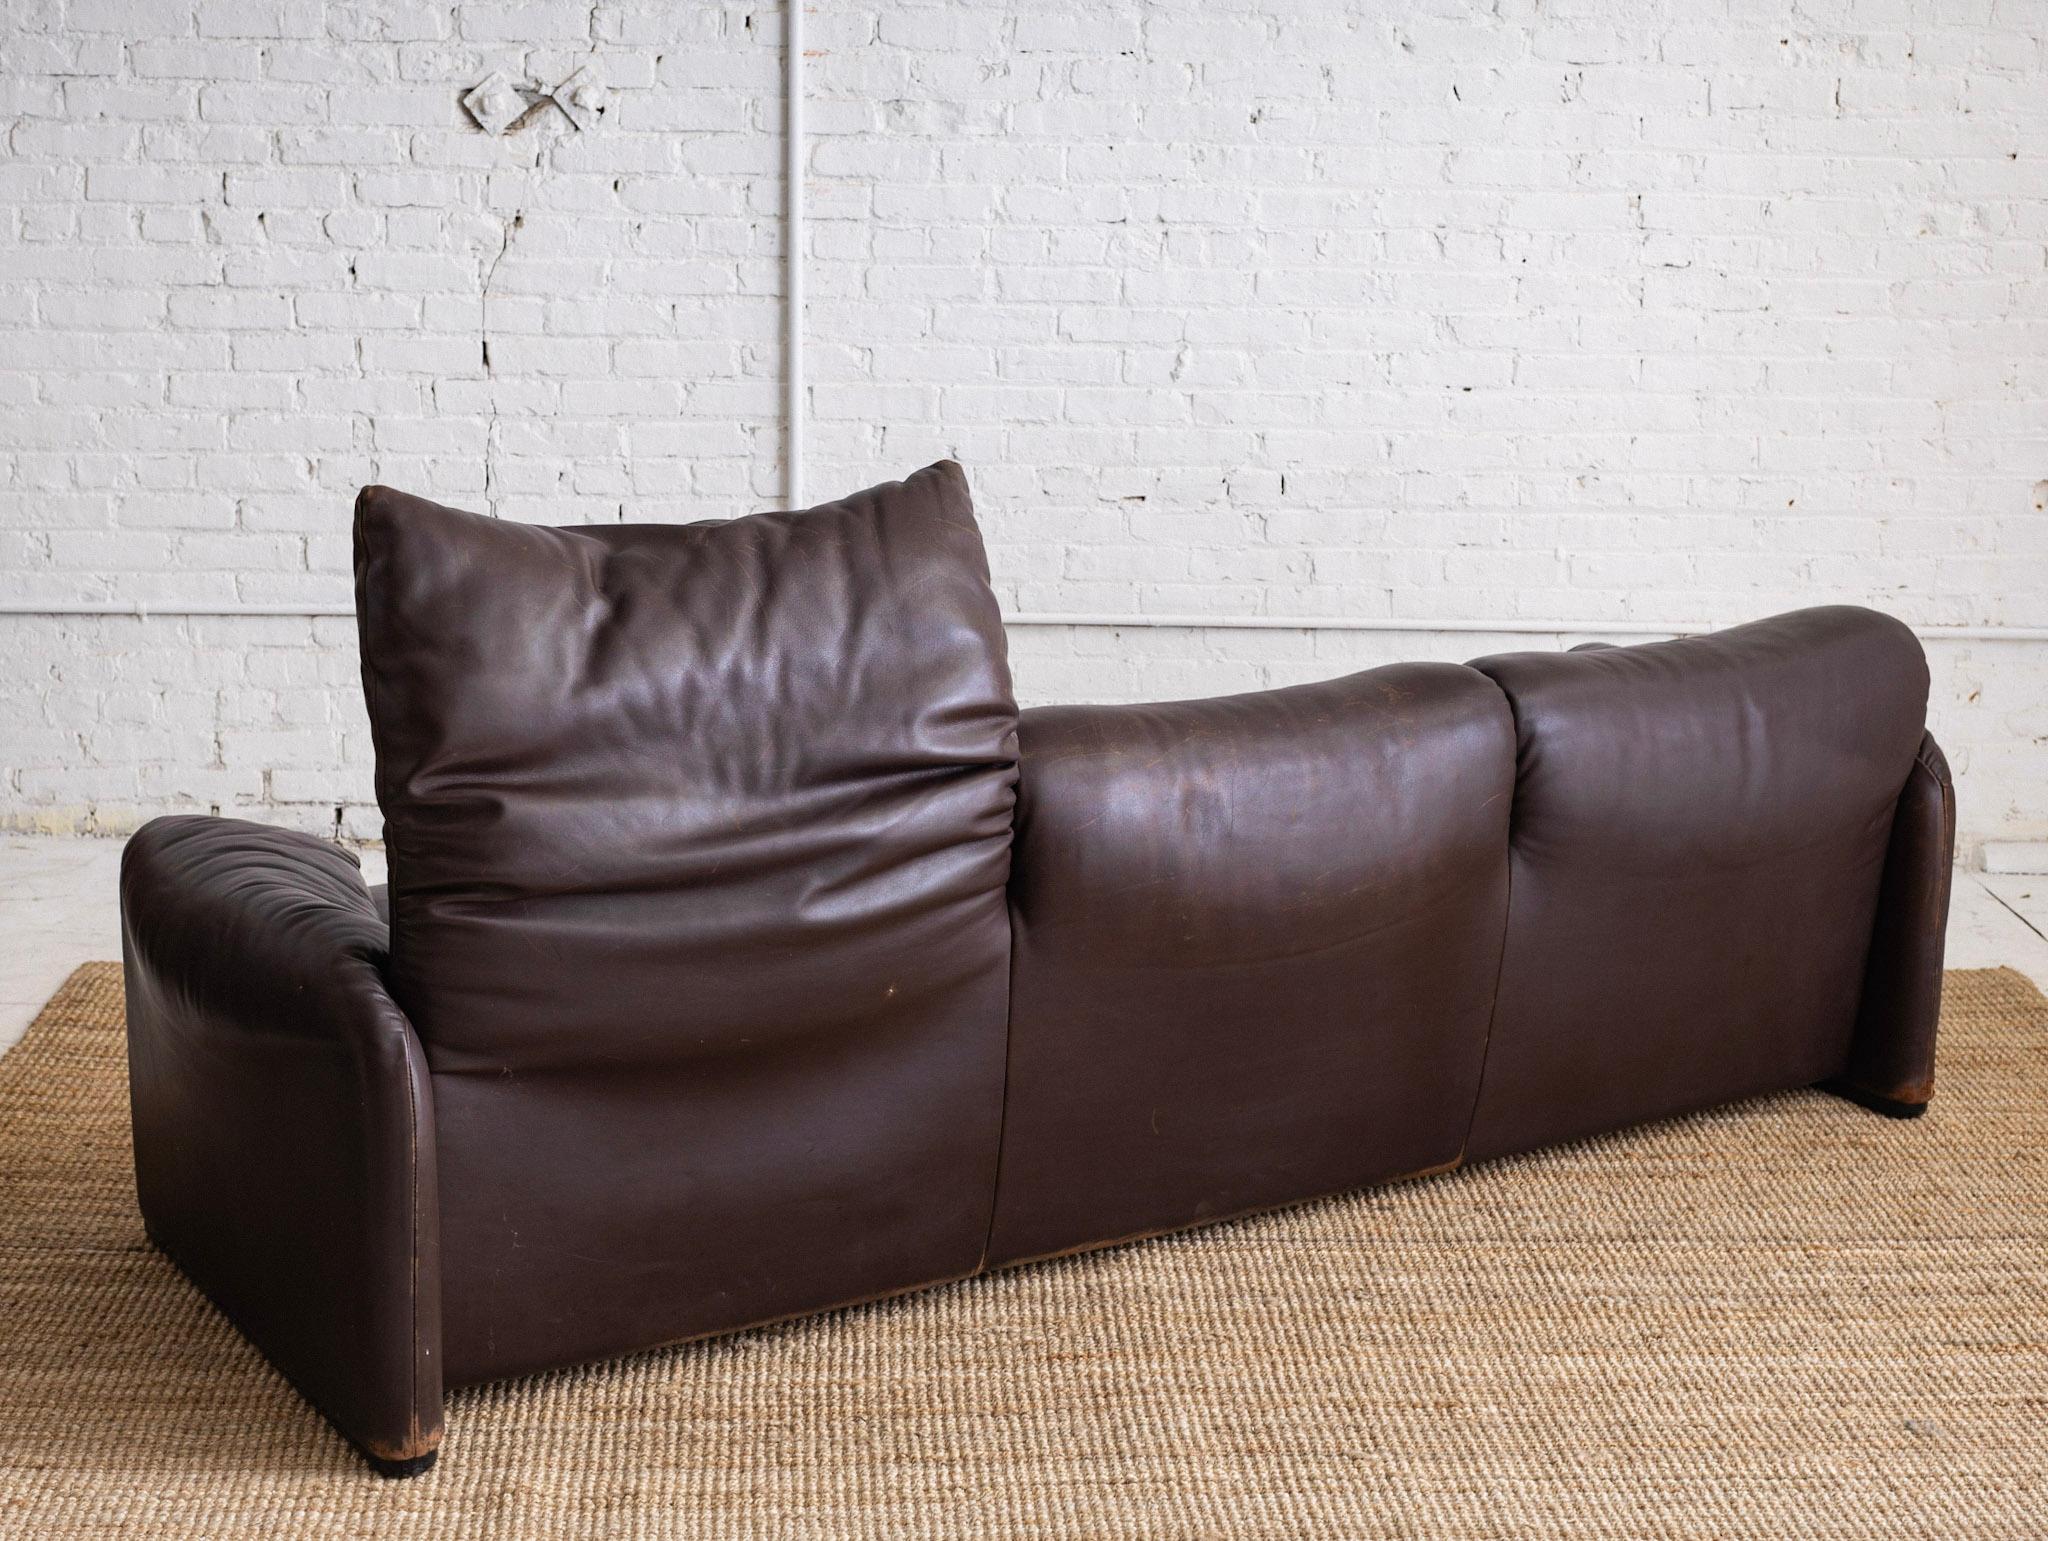 Maralunga 3 Seat Sofa by Vico Magistretti for Cassina in Chocolate Brown Leather 6